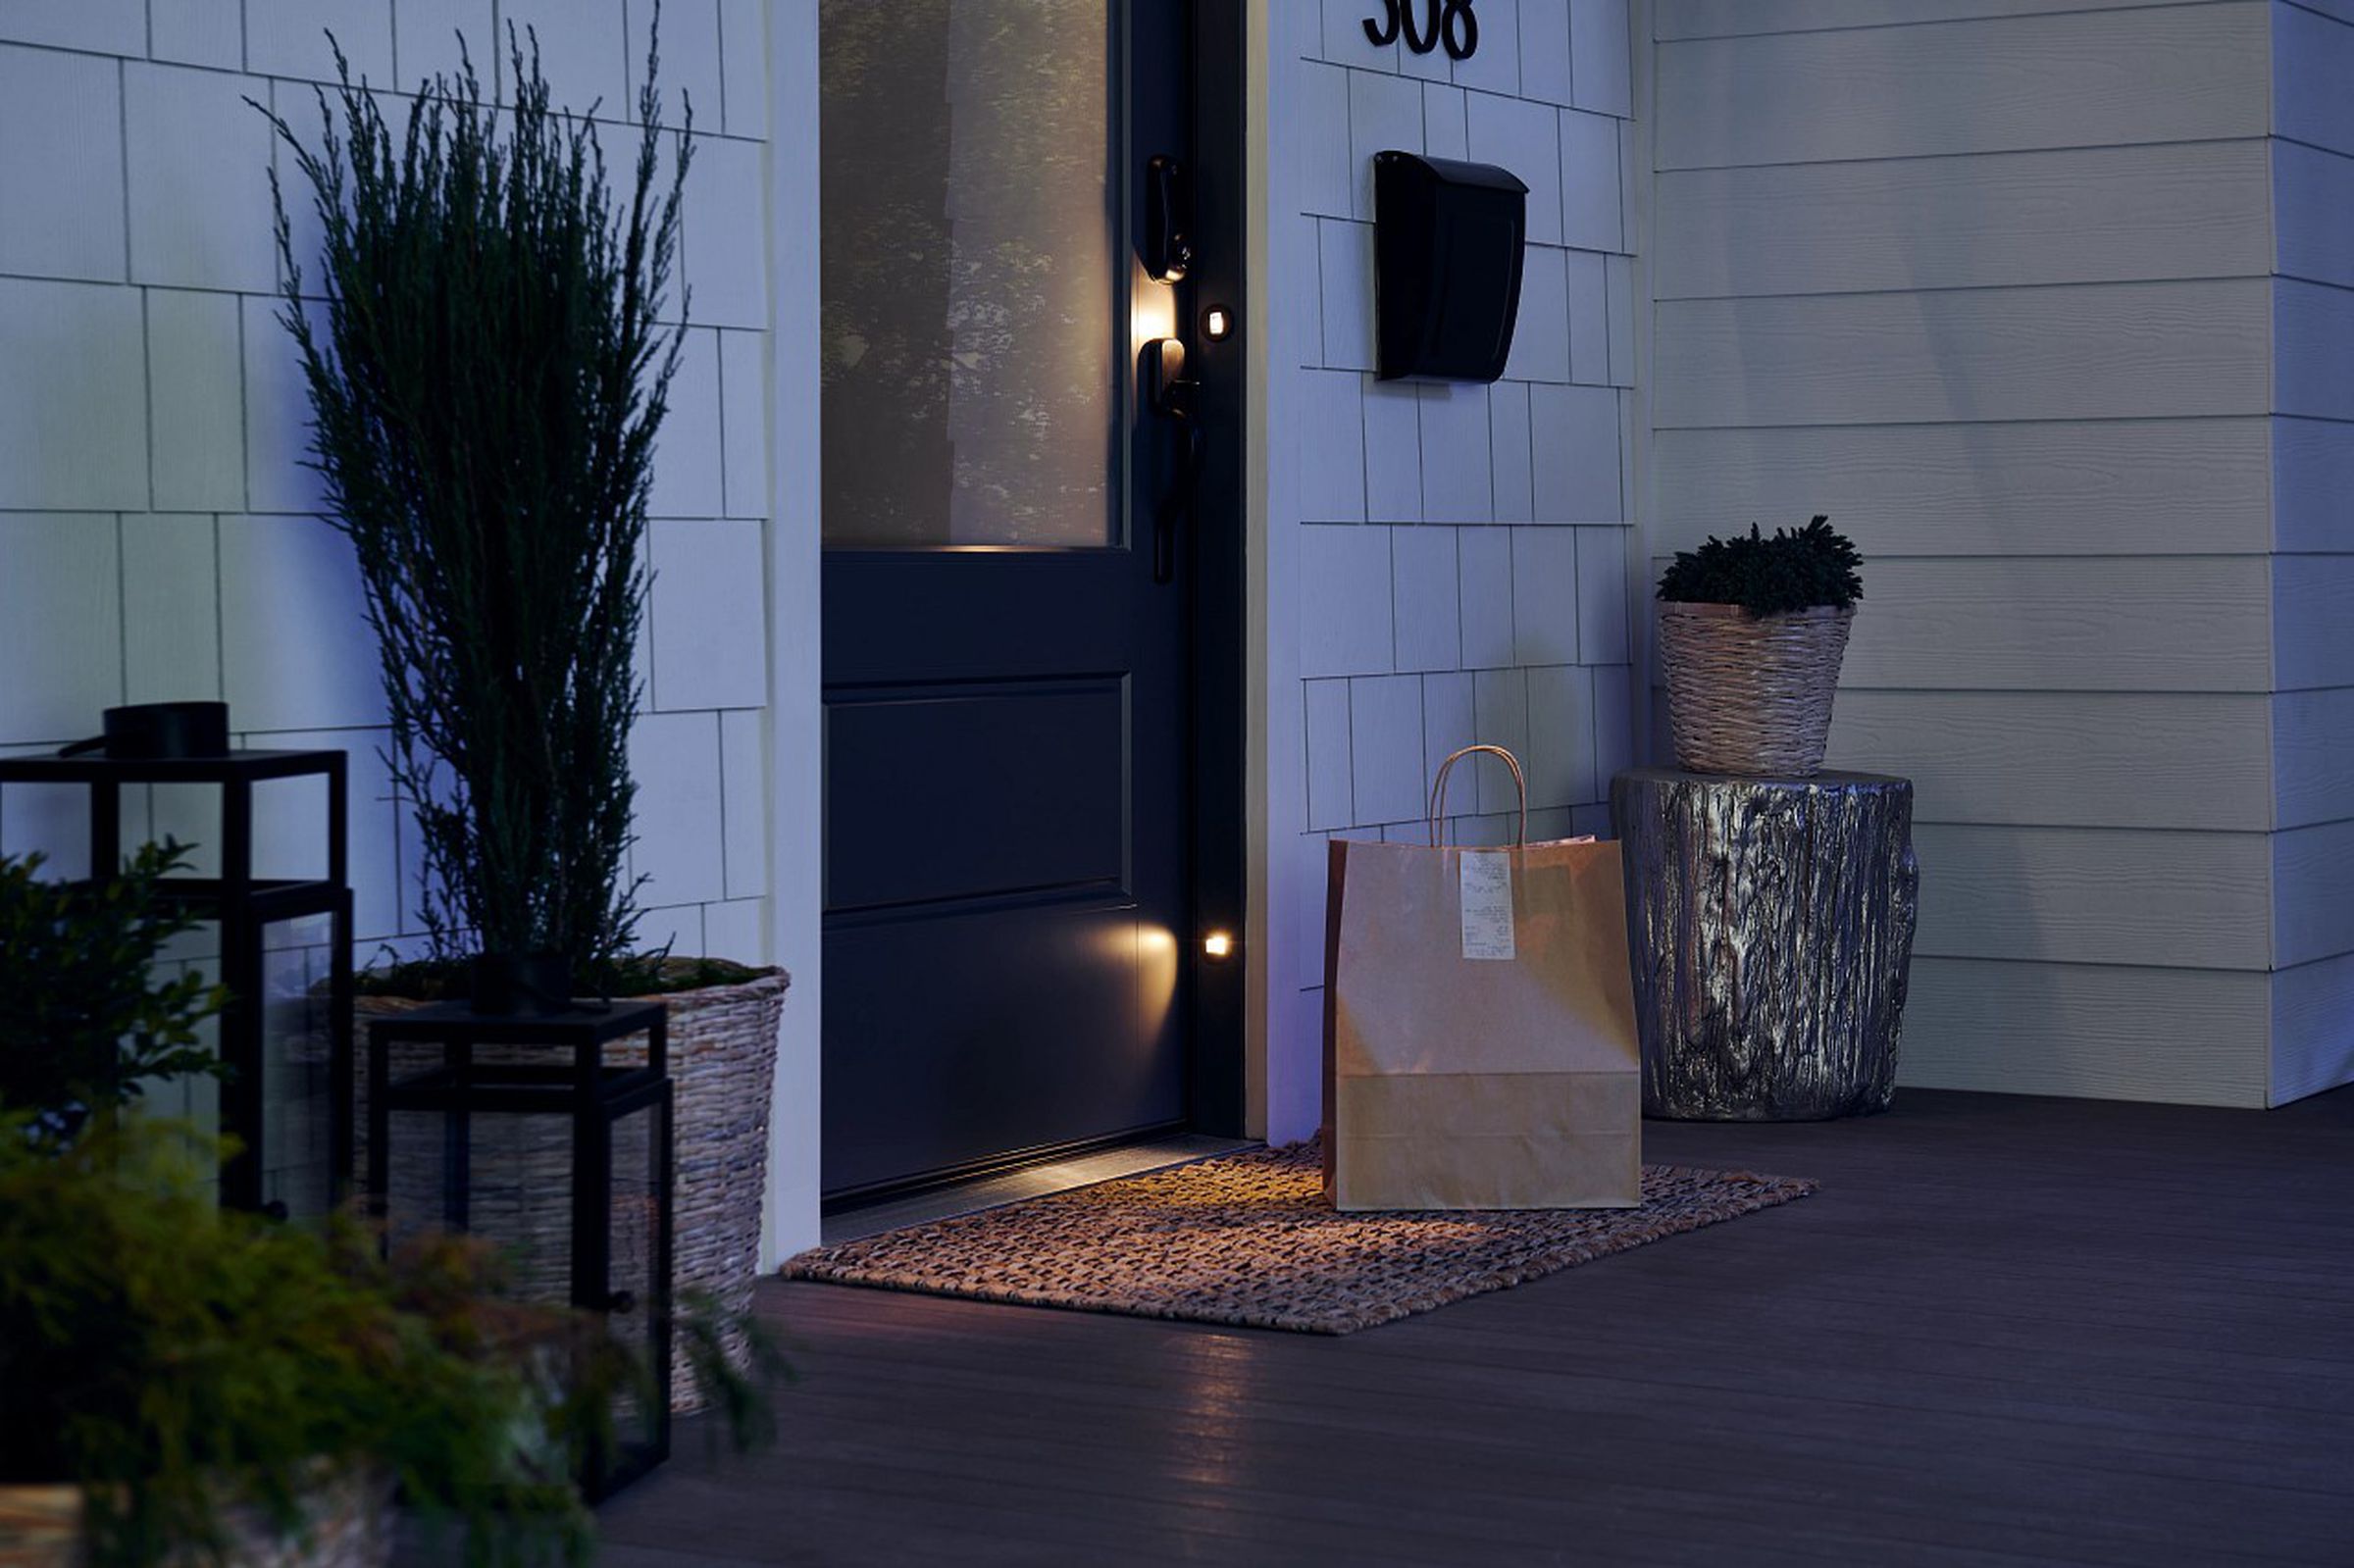 Integrated LED smart lighting on the door can work on motion or be set to turn on from dusk to dawn.